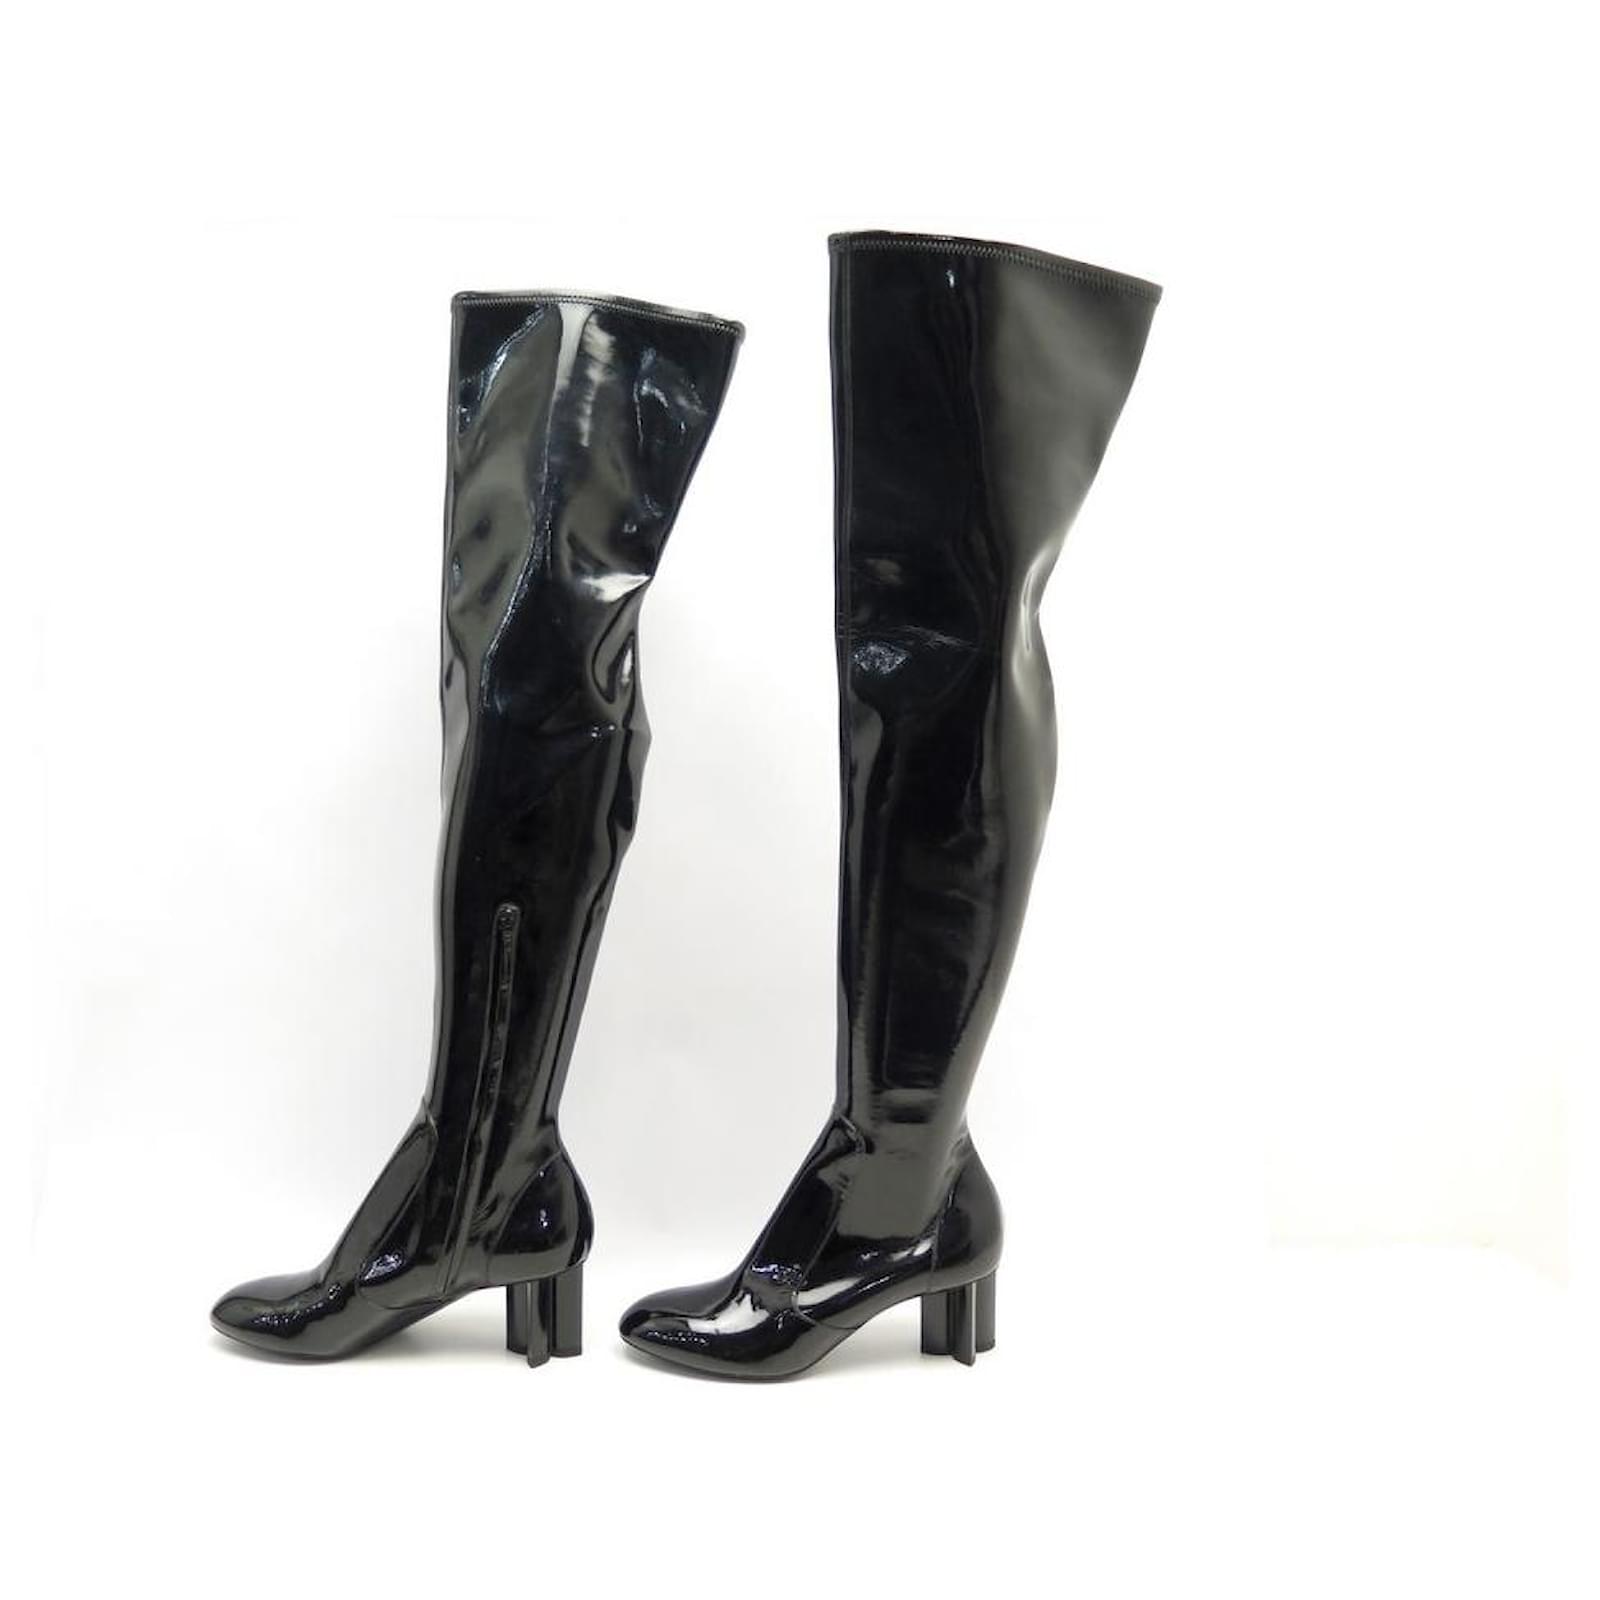 NEW LOUIS VUITTON BOOTS SHOES SILHOUETTE BLACK PATENT LEATHER